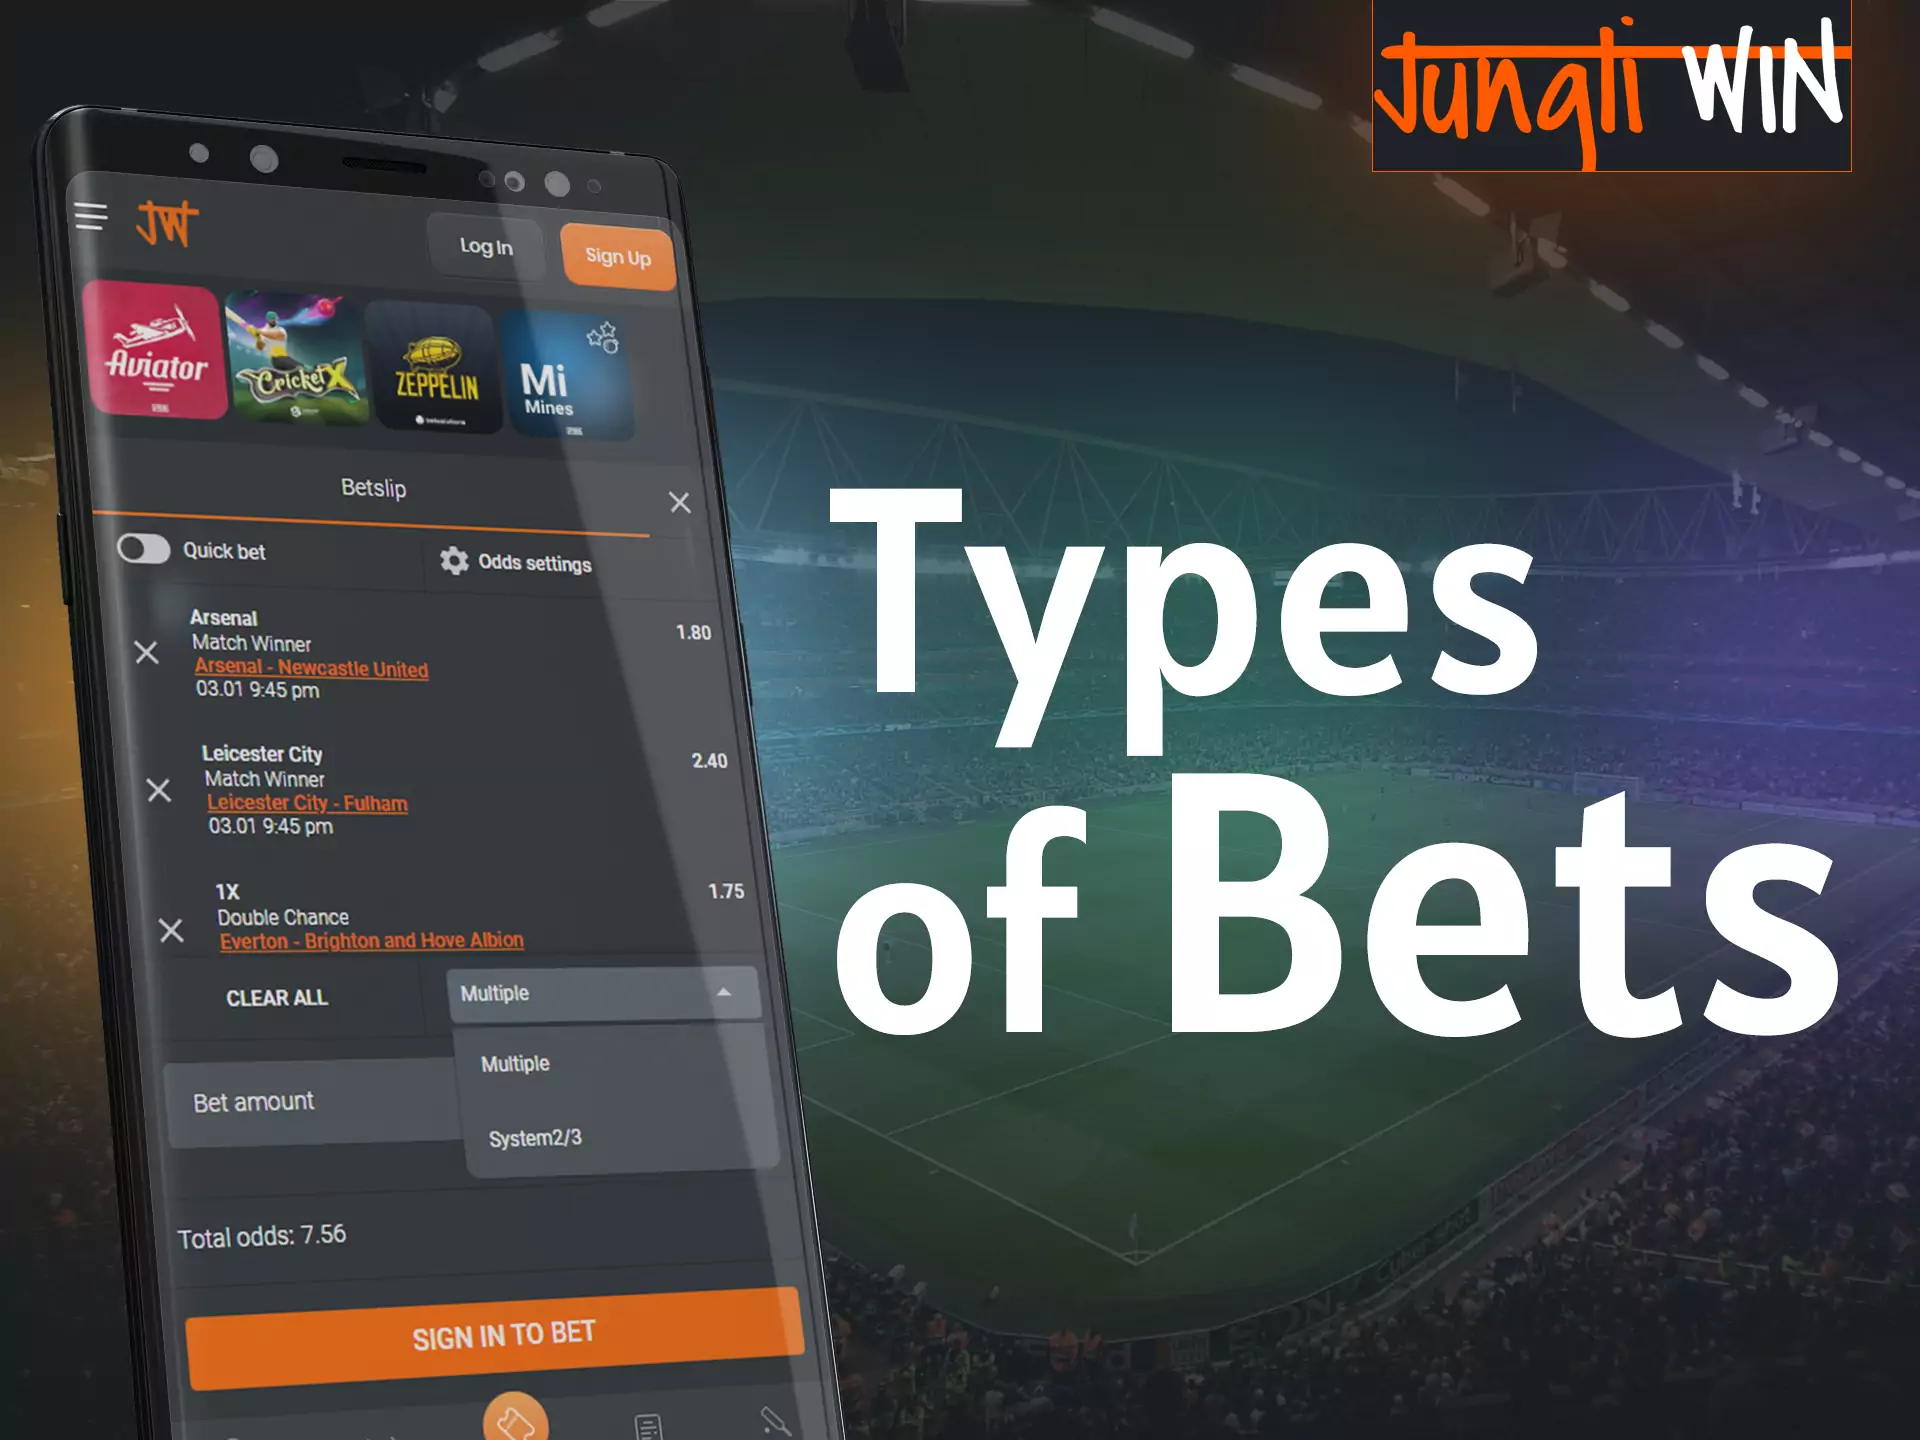 Jungliwin offers players to try different types of bets on sports events.